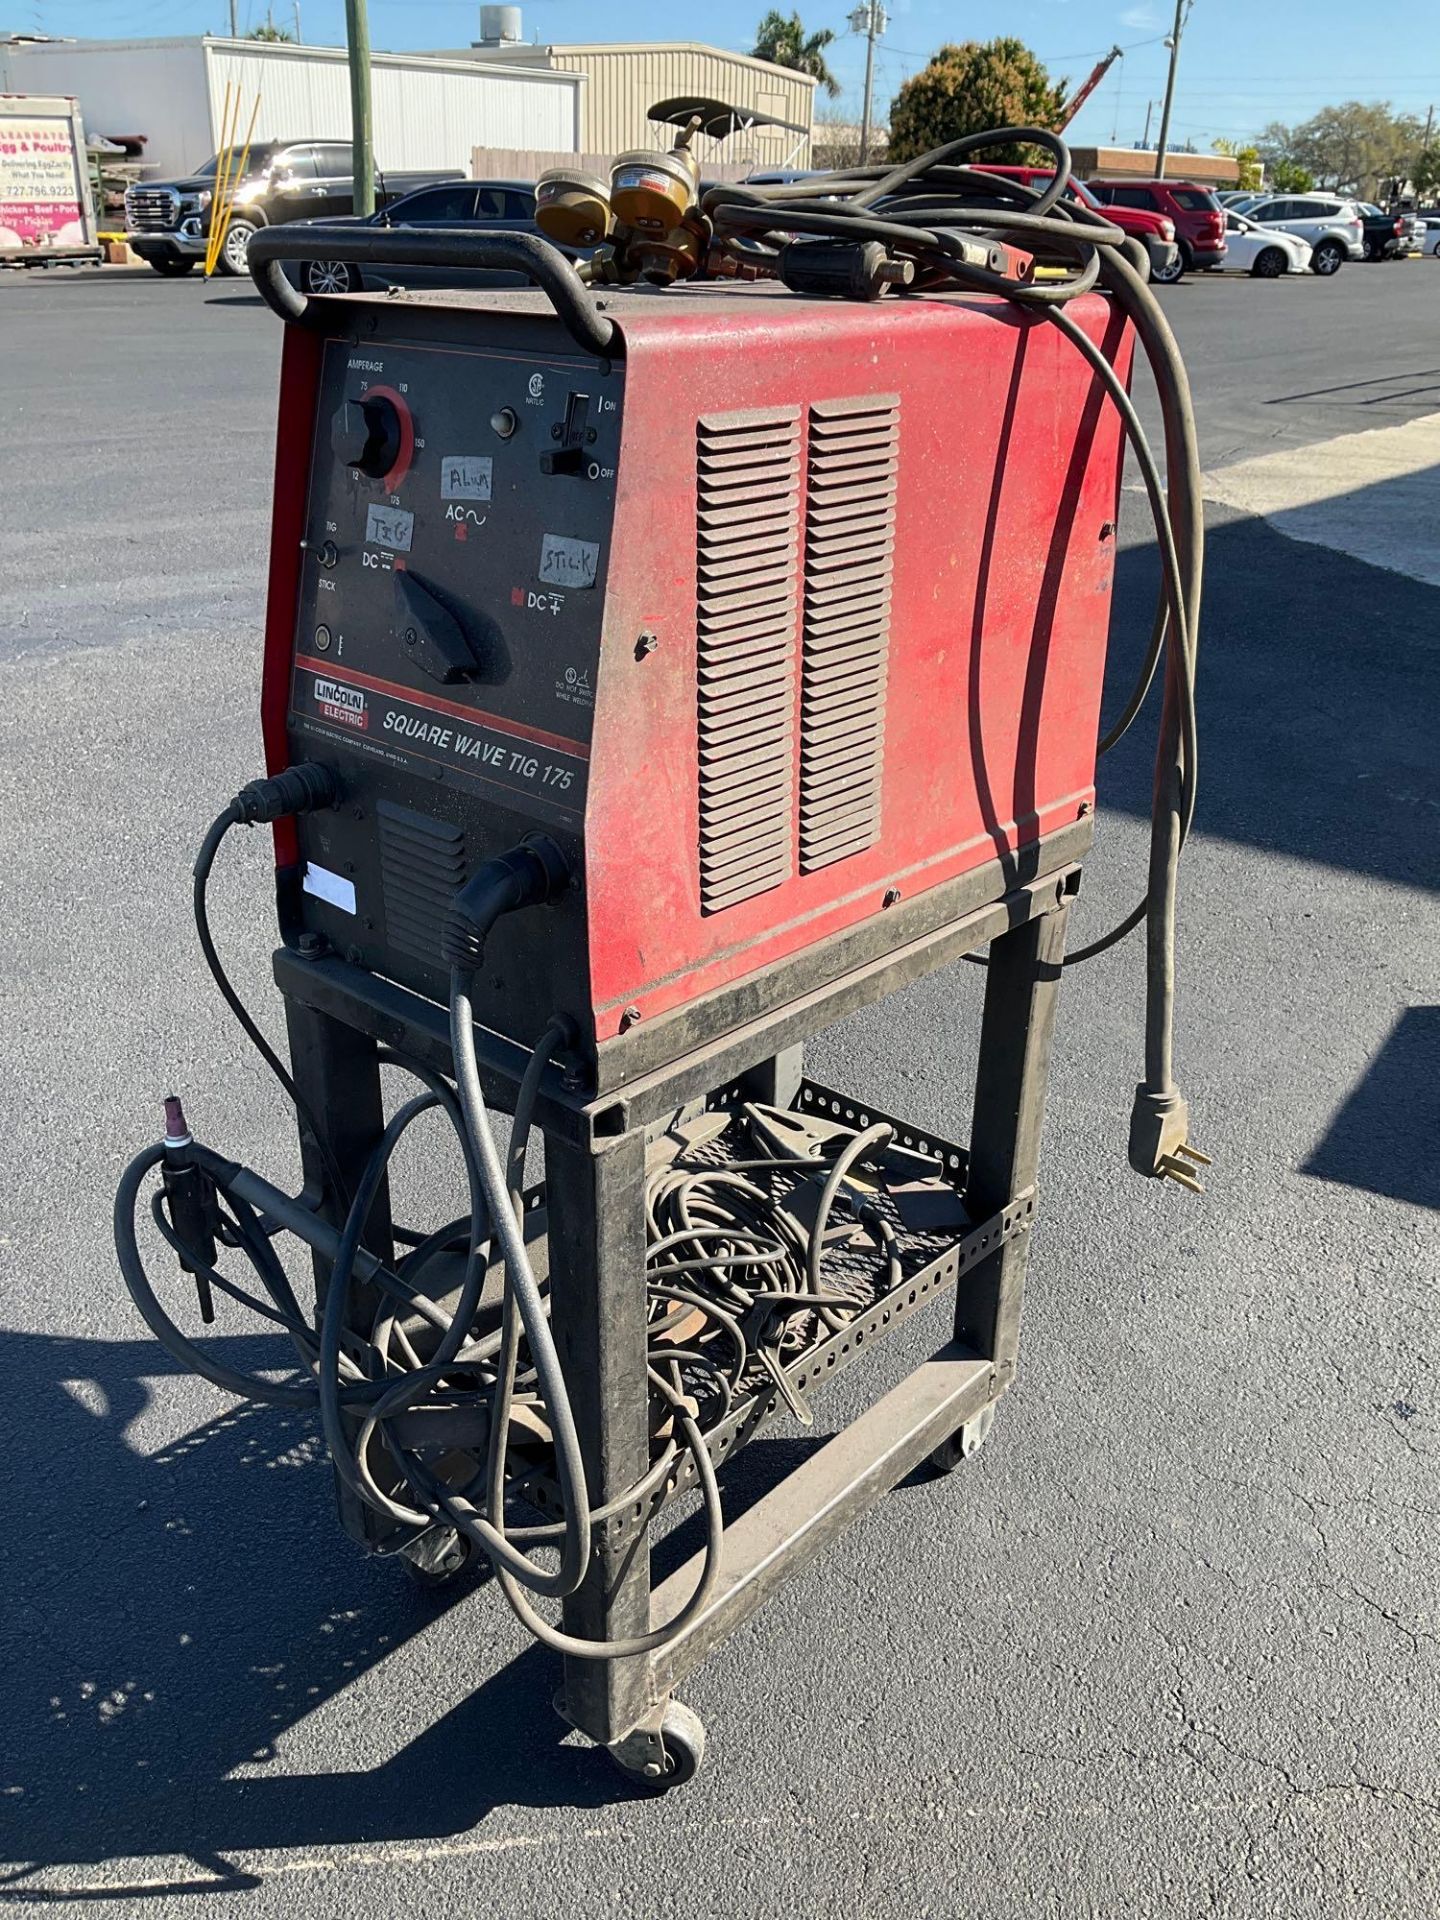 LINCOLN ELECTRIC SQUARE WAVE TIG 175 WELDER - Image 8 of 10